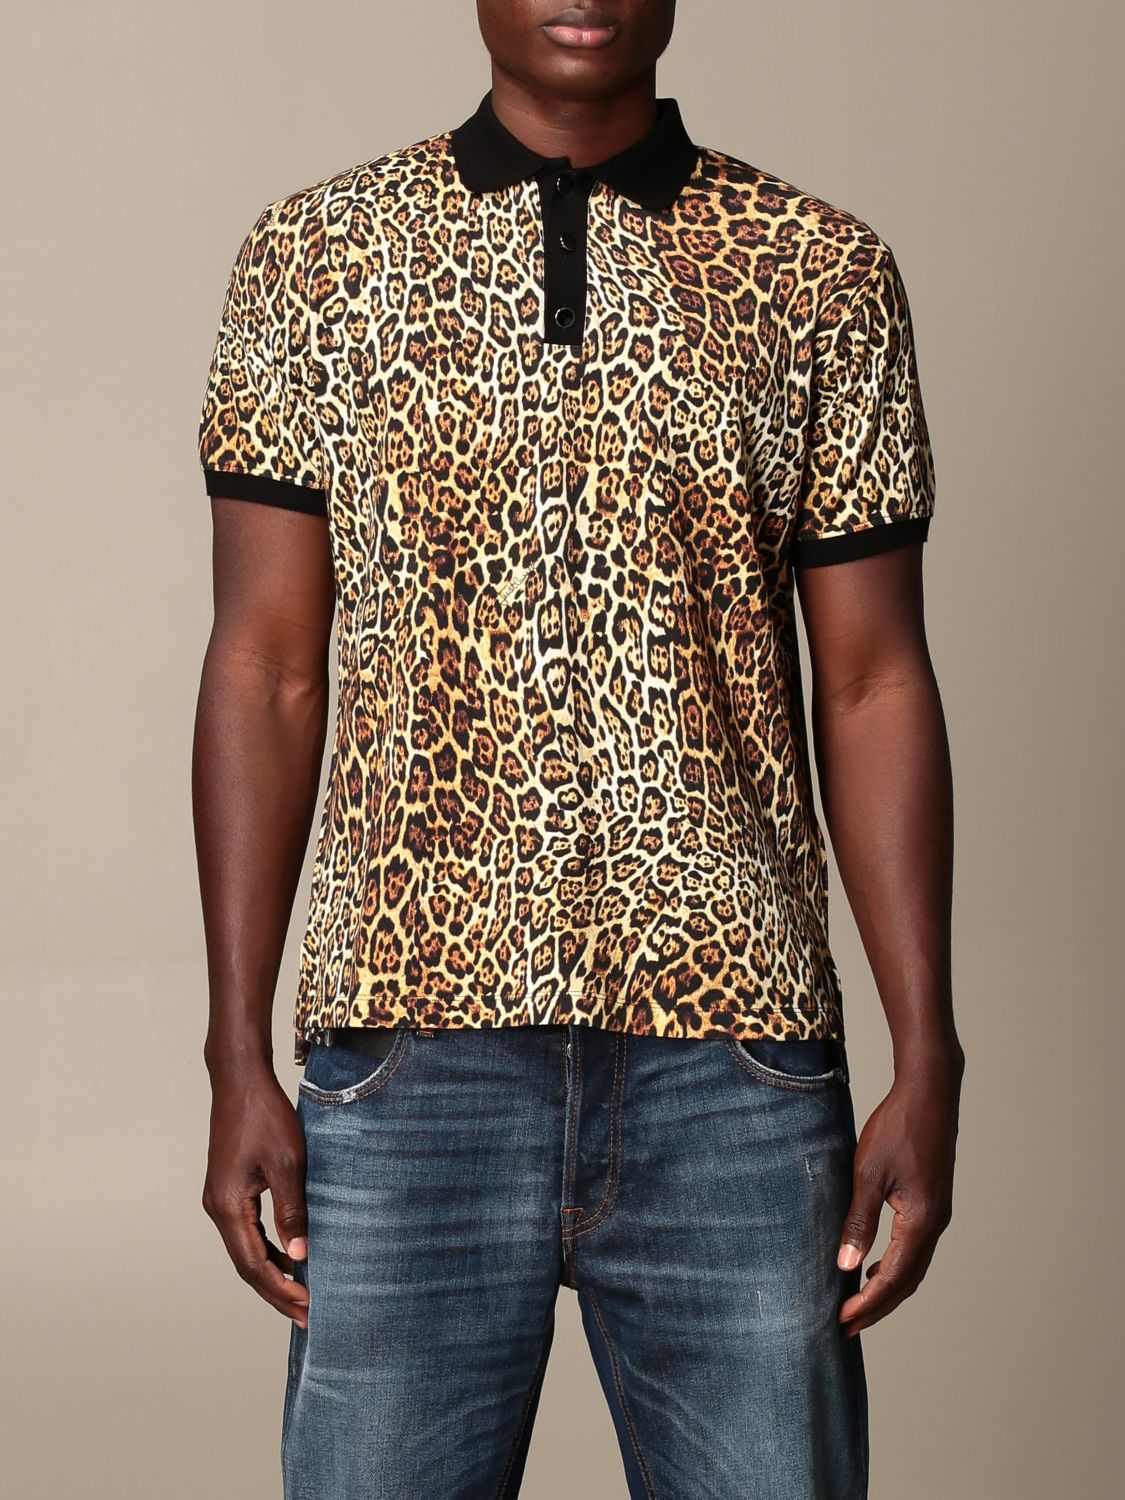 Just Cavalli Outlet: animalier polo shirt - Beige | Just Cavalli polo ...